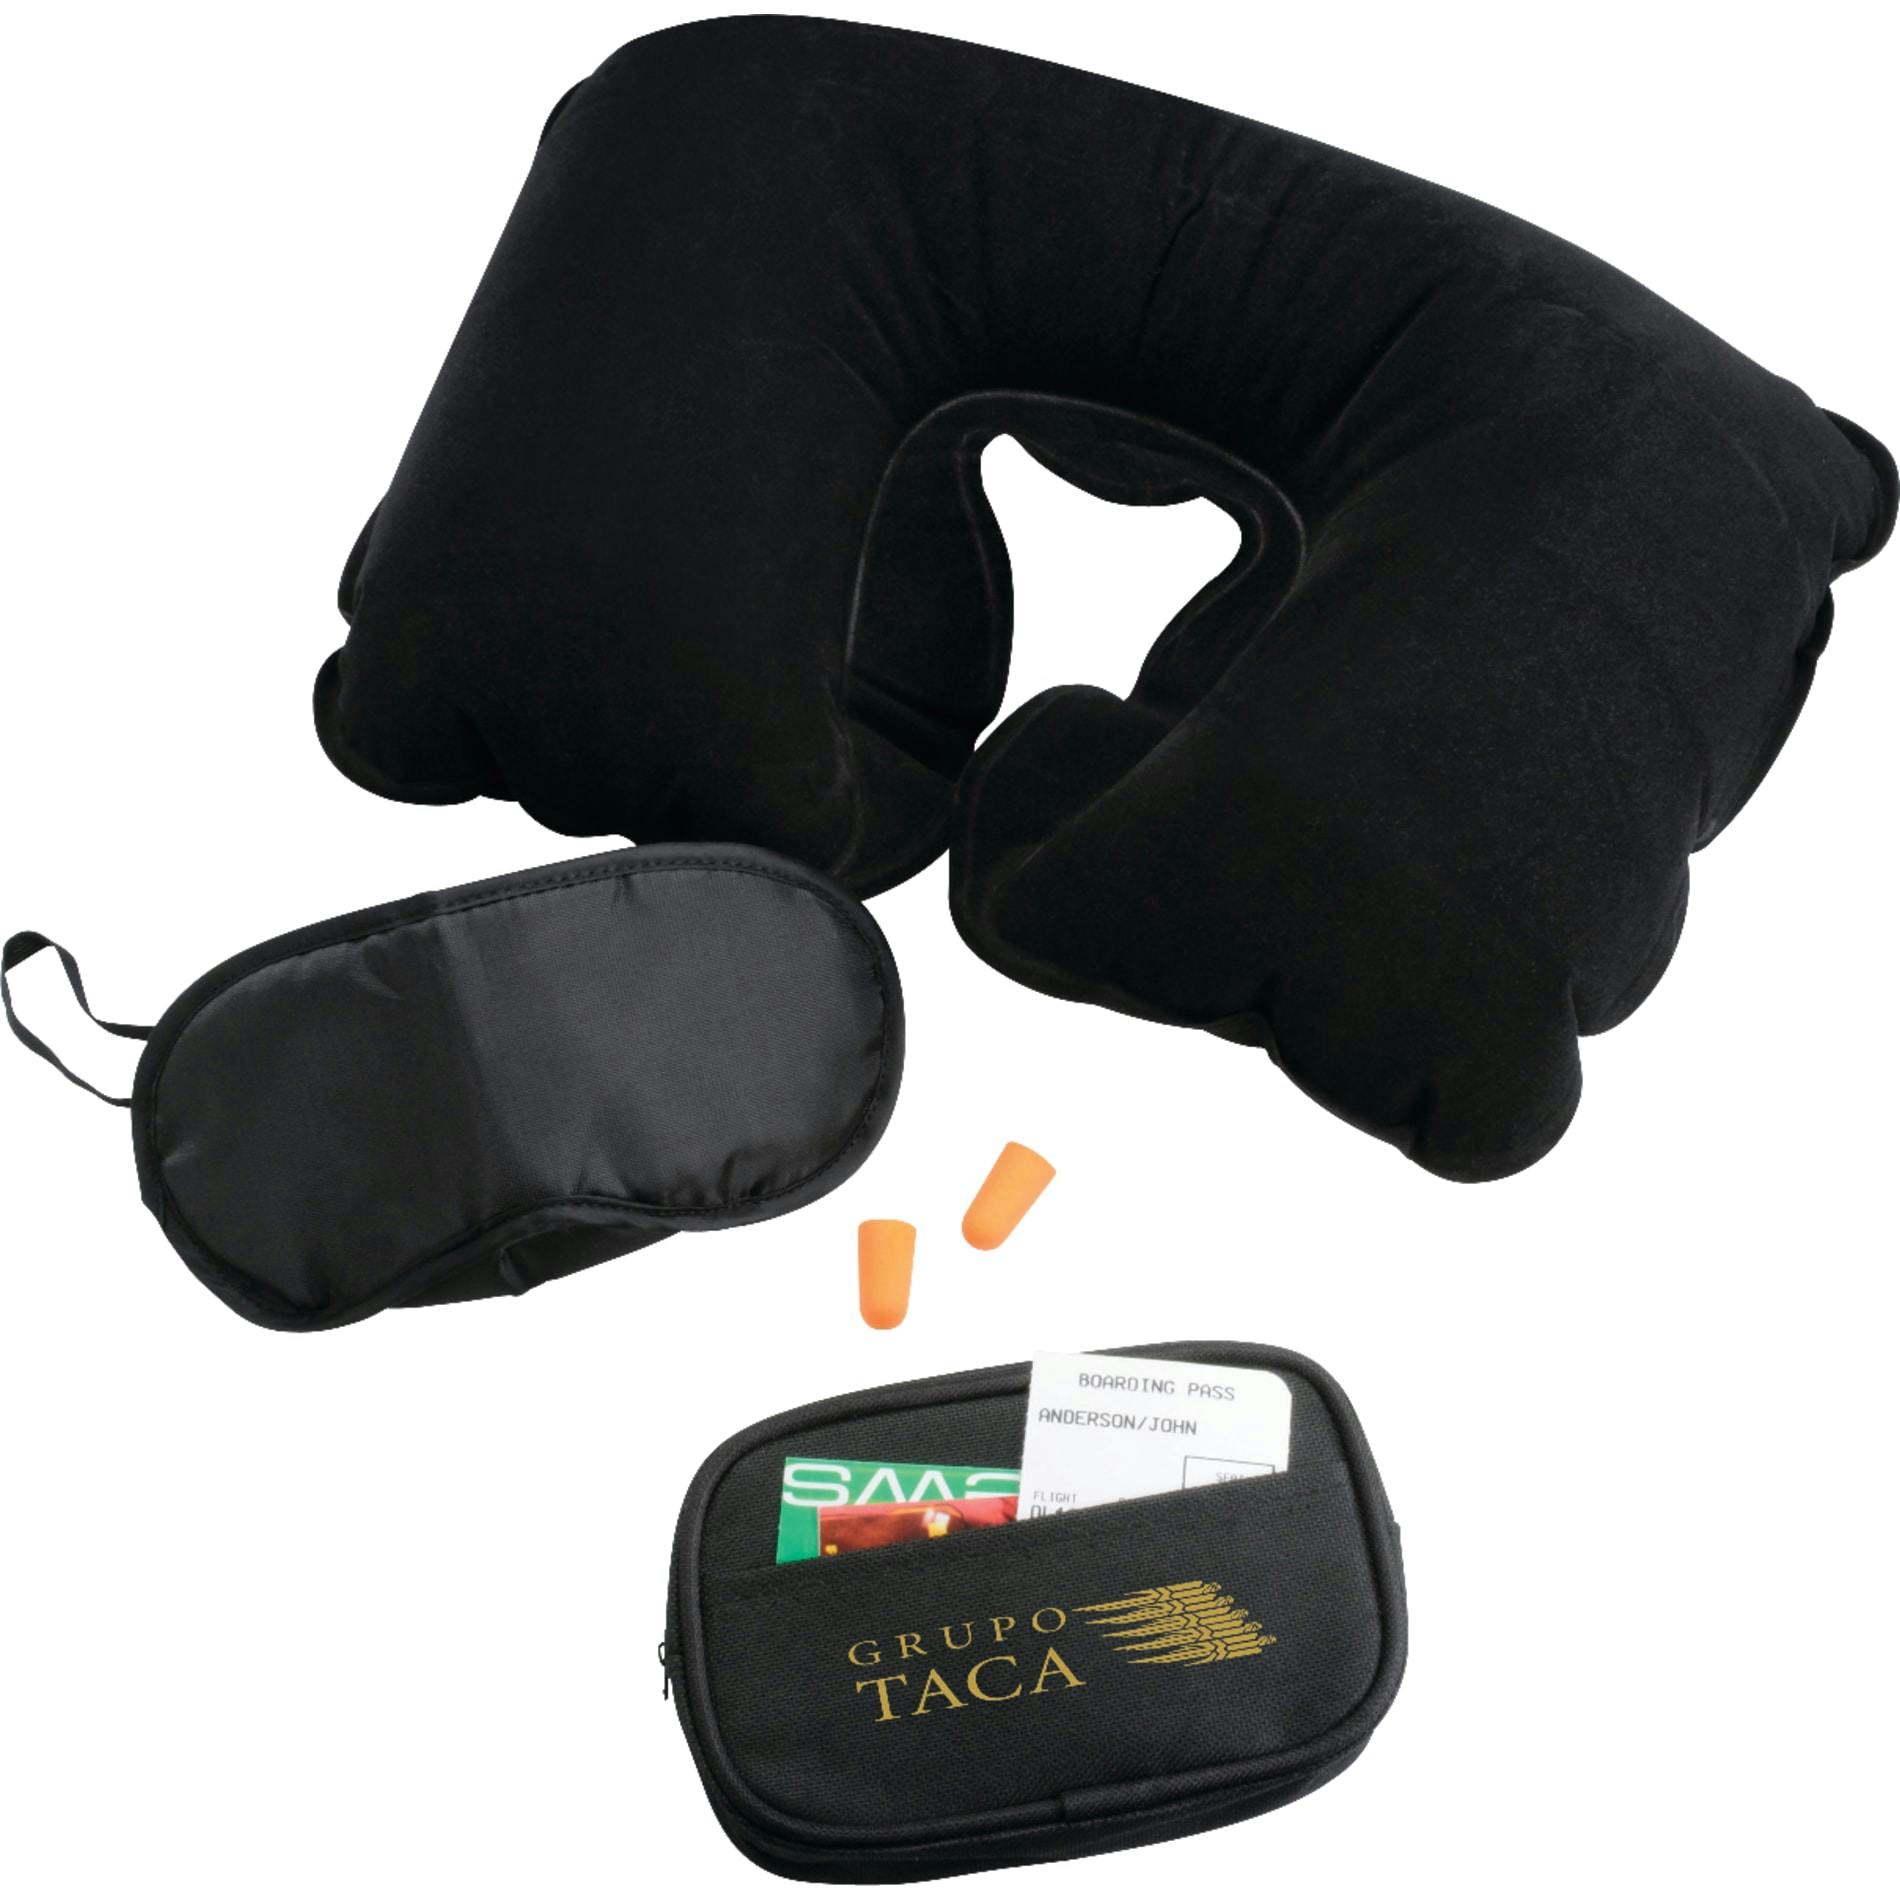 Personal Comfort Travel Kit - additional Image 1